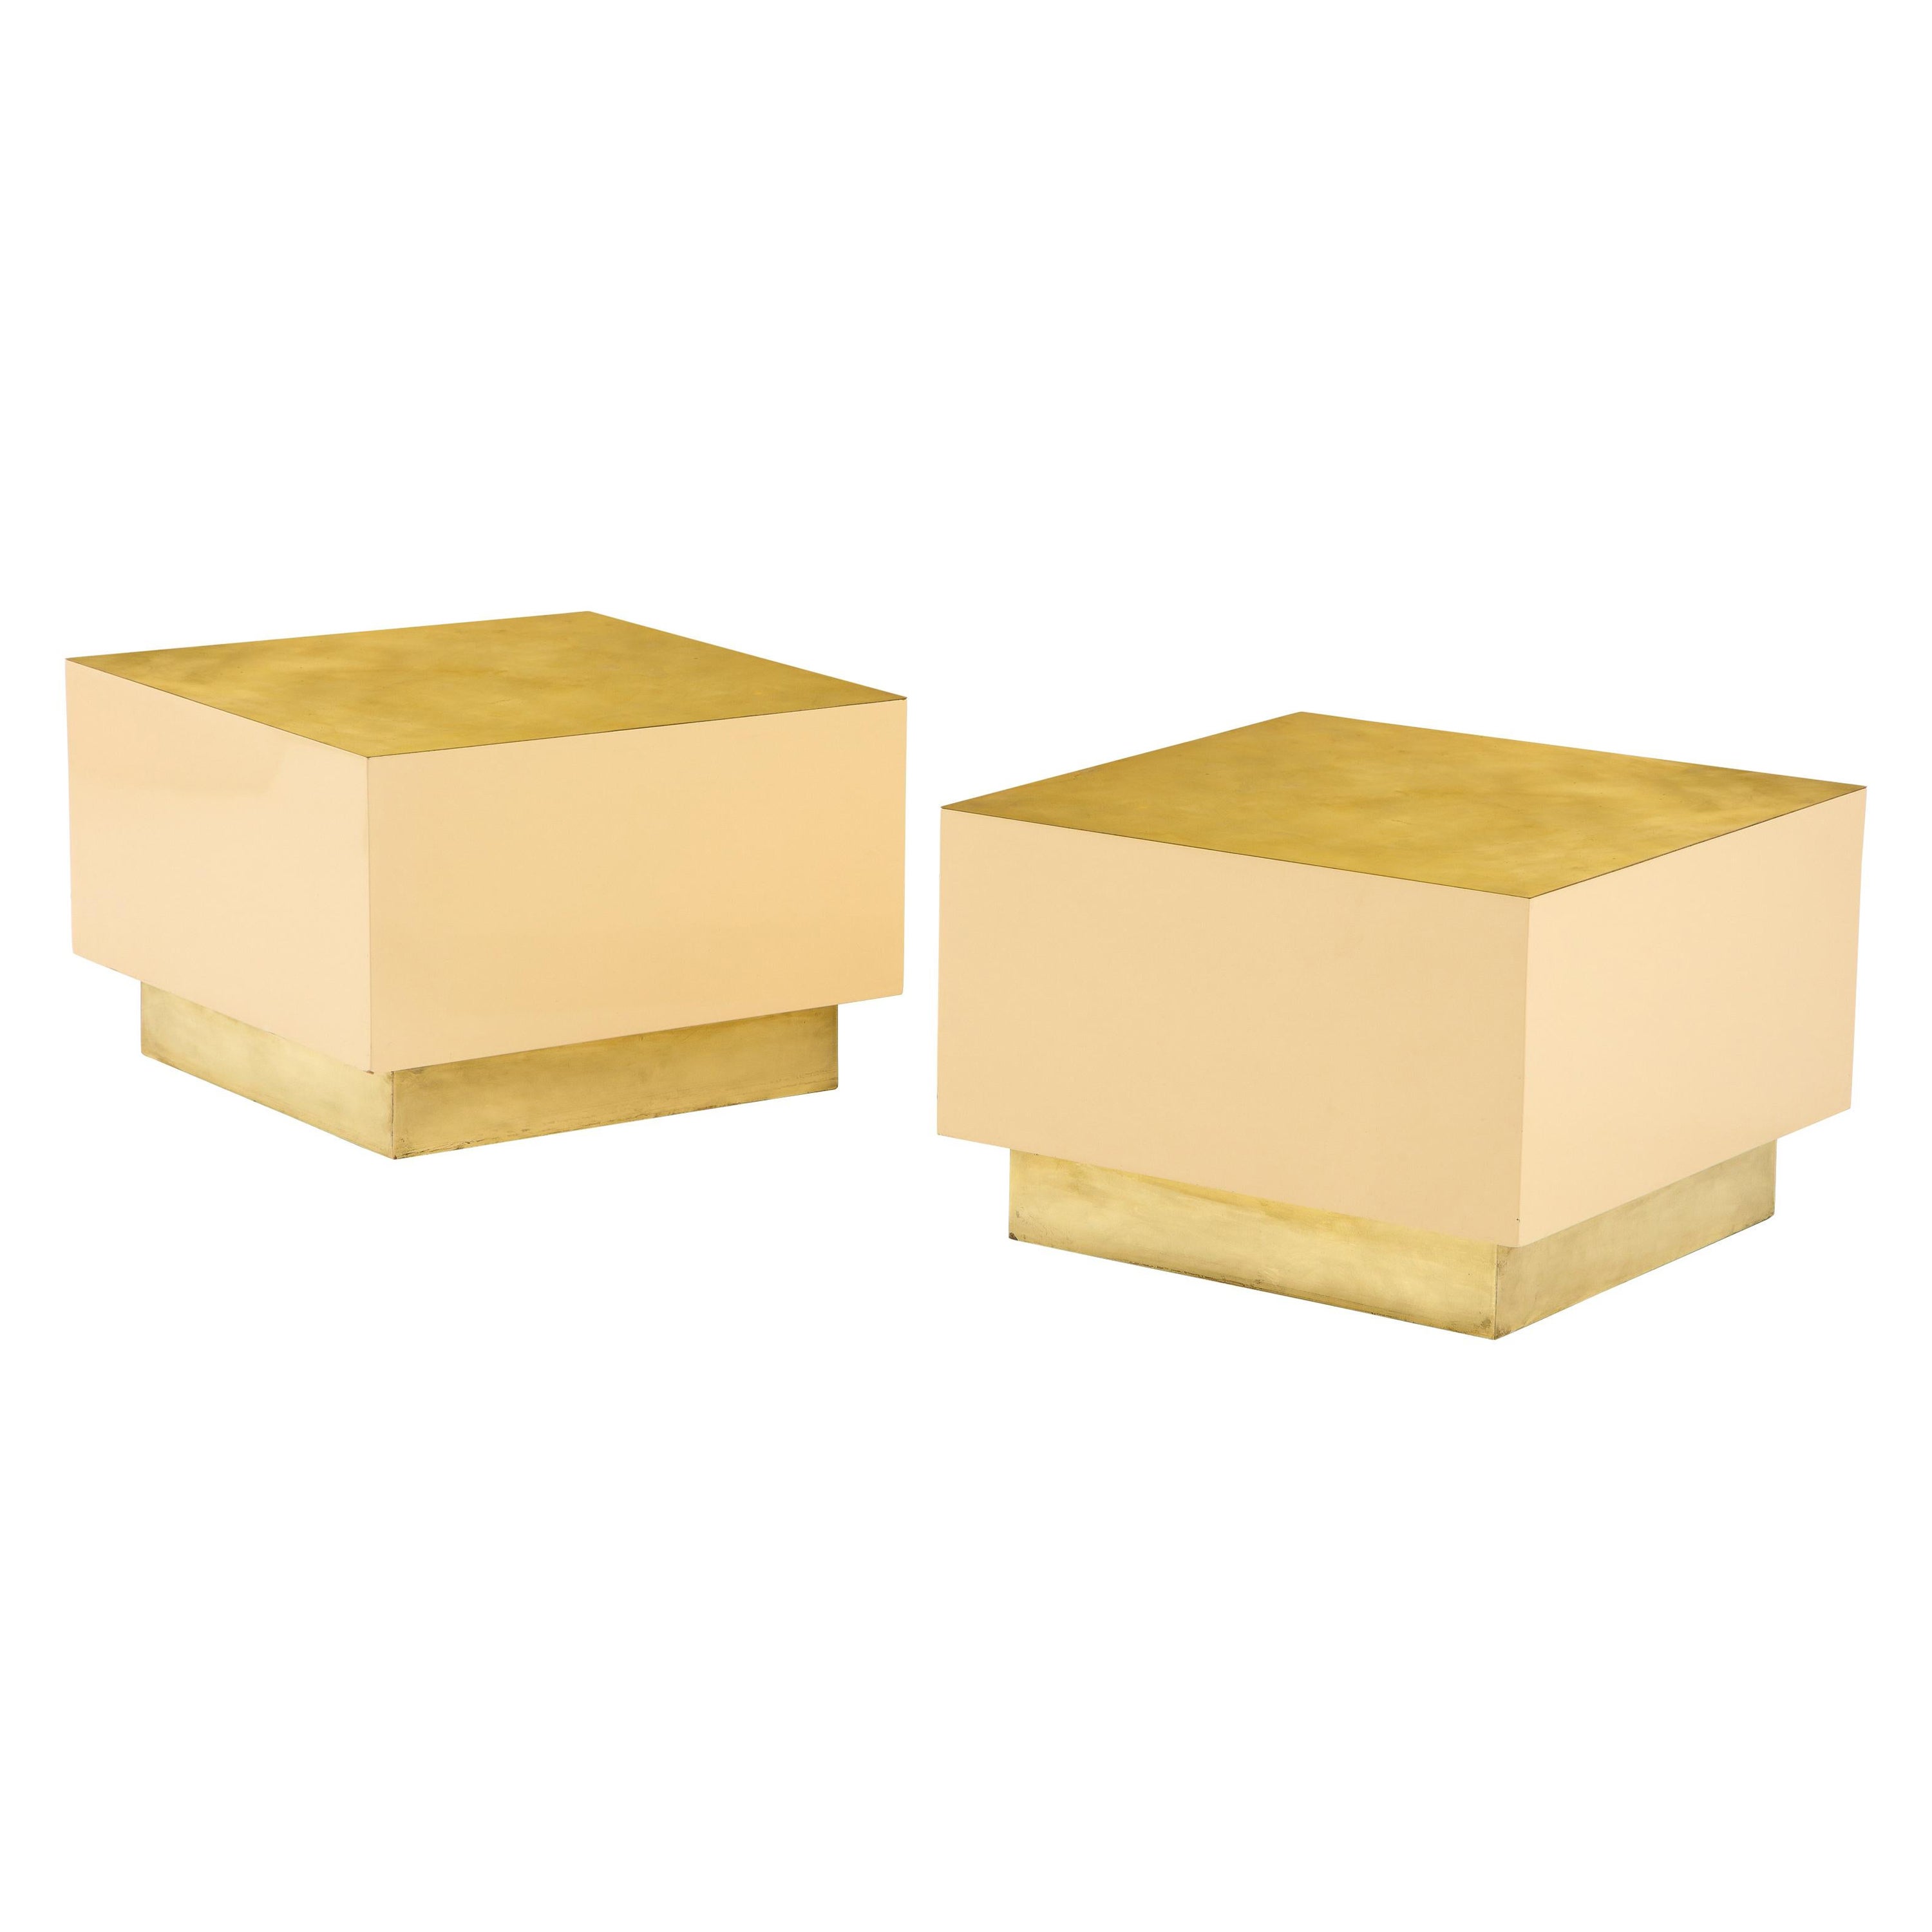 Pair of Italian 1970s Brass and Lacquer Cube Form Coffee Tables For Sale